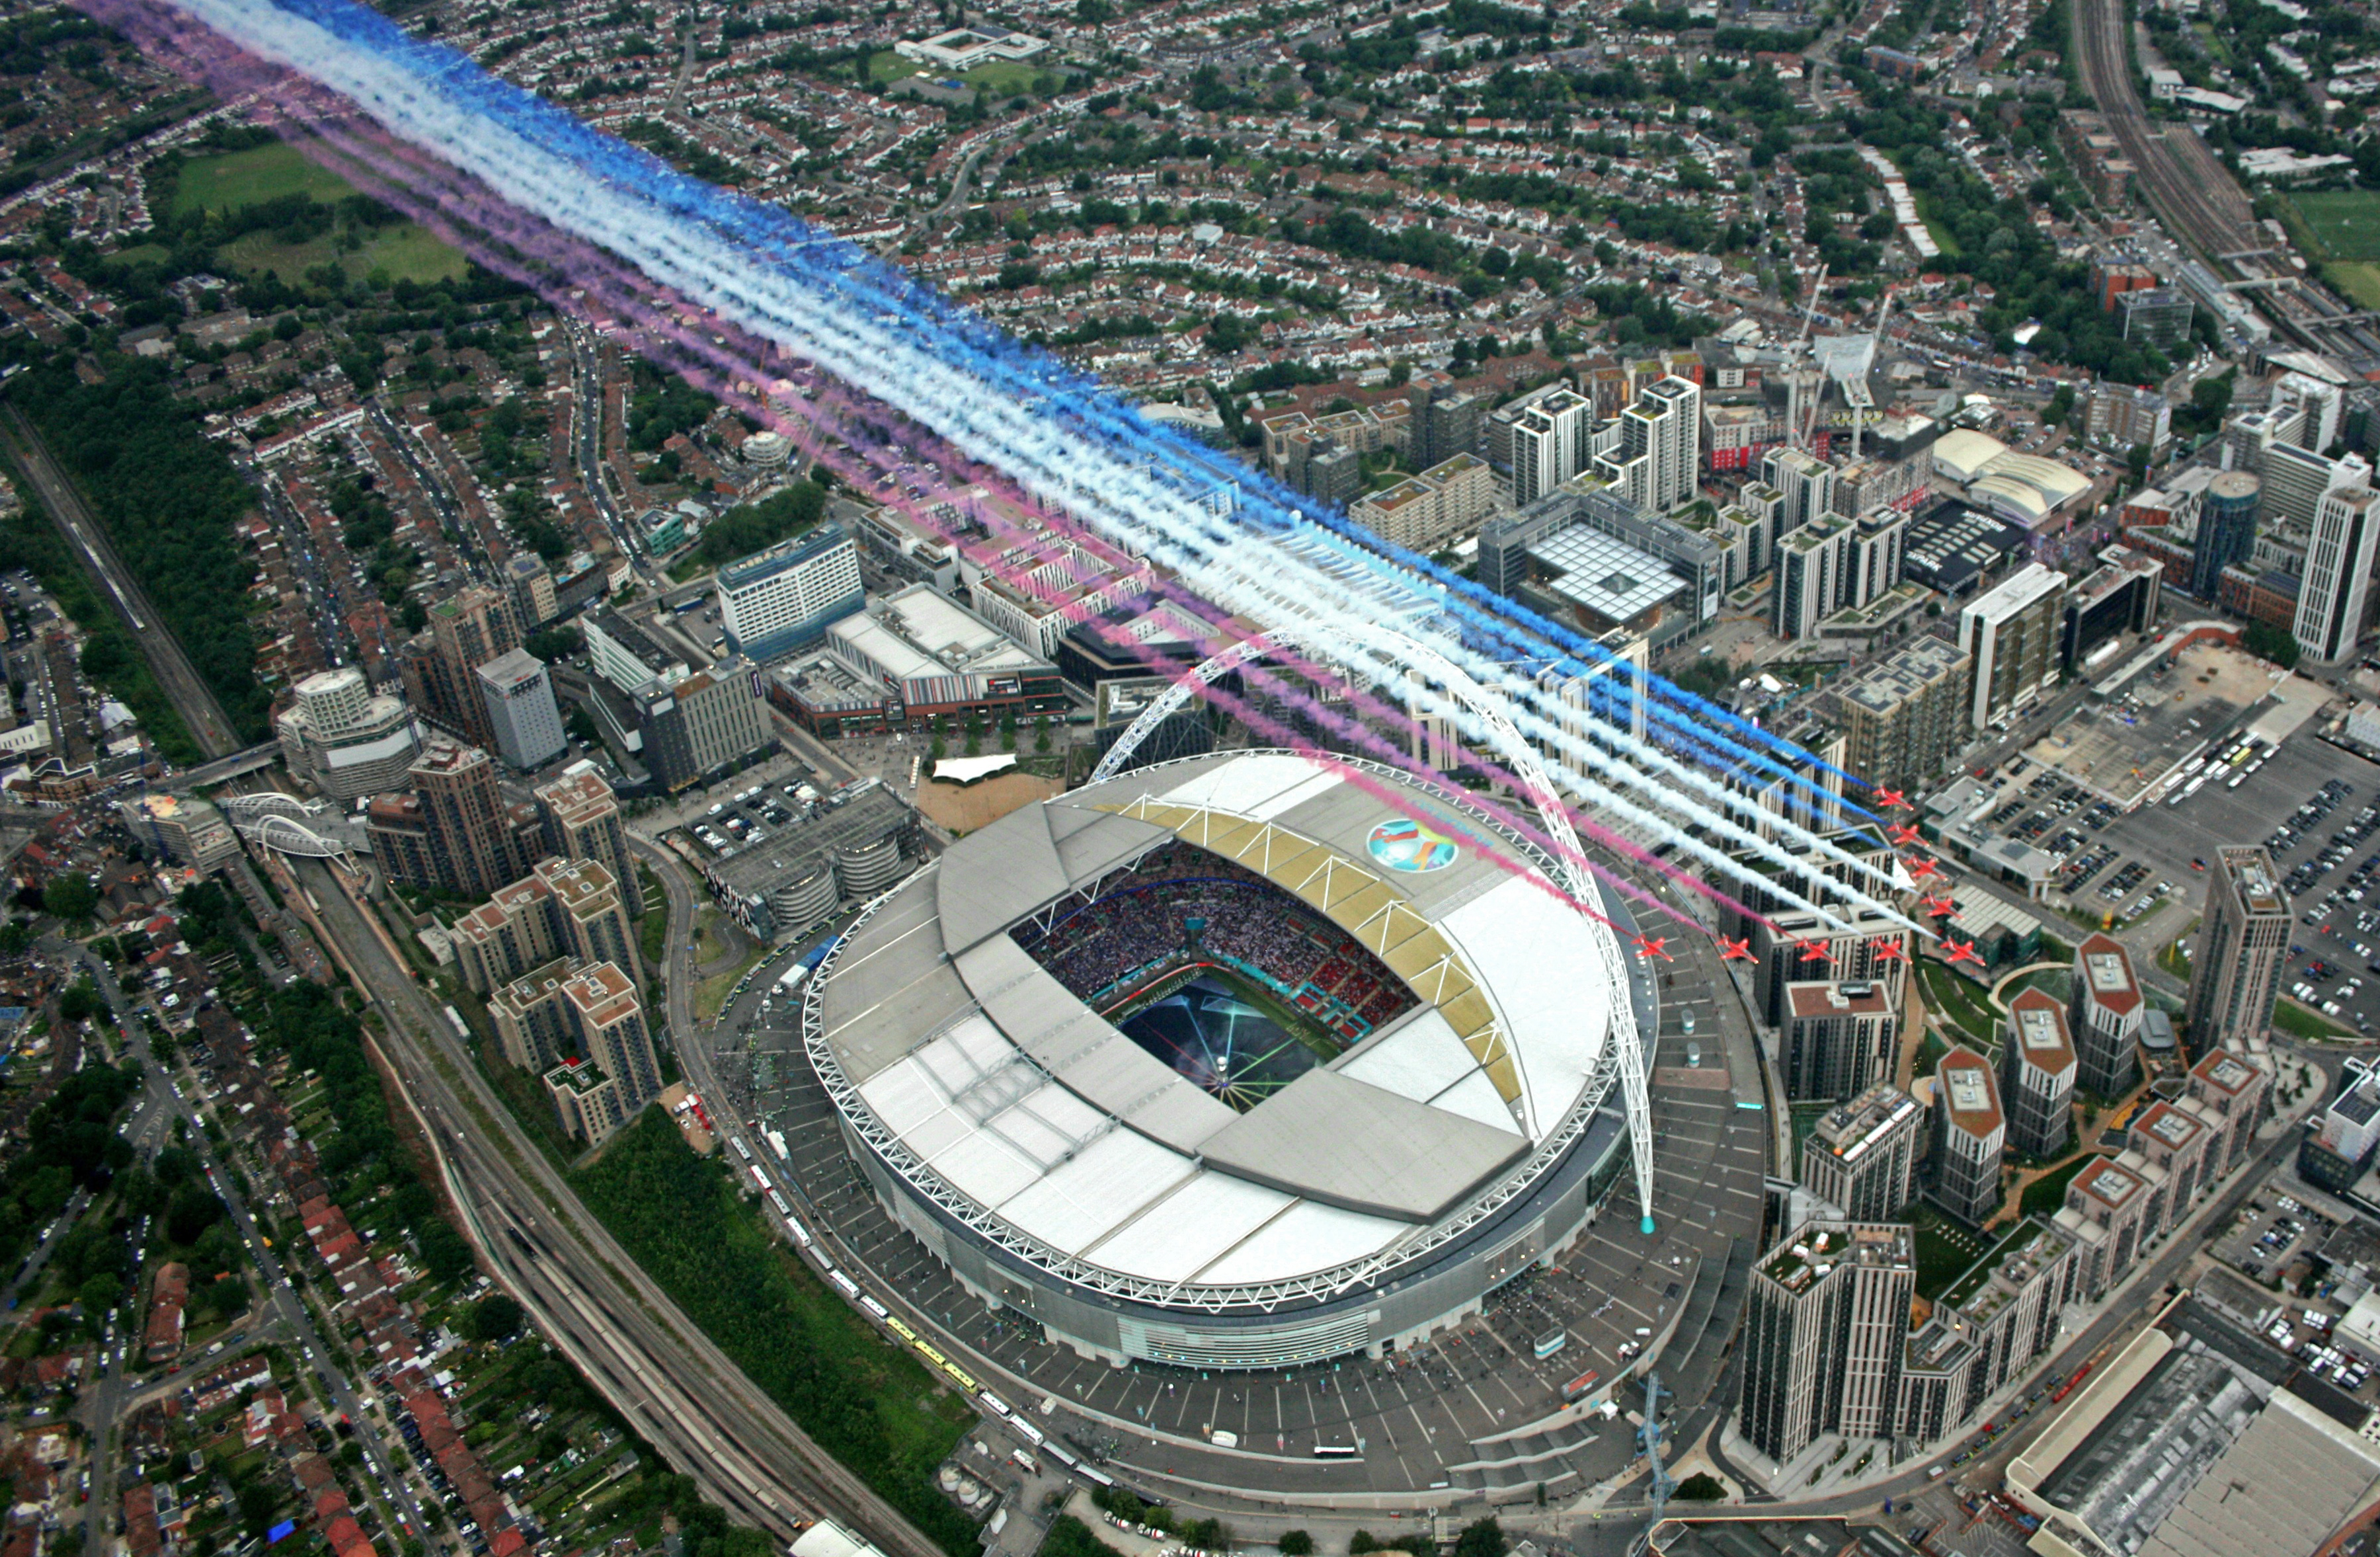 Over Wembley - the Red Arrows perform a flypast for the Euro 2020 final.